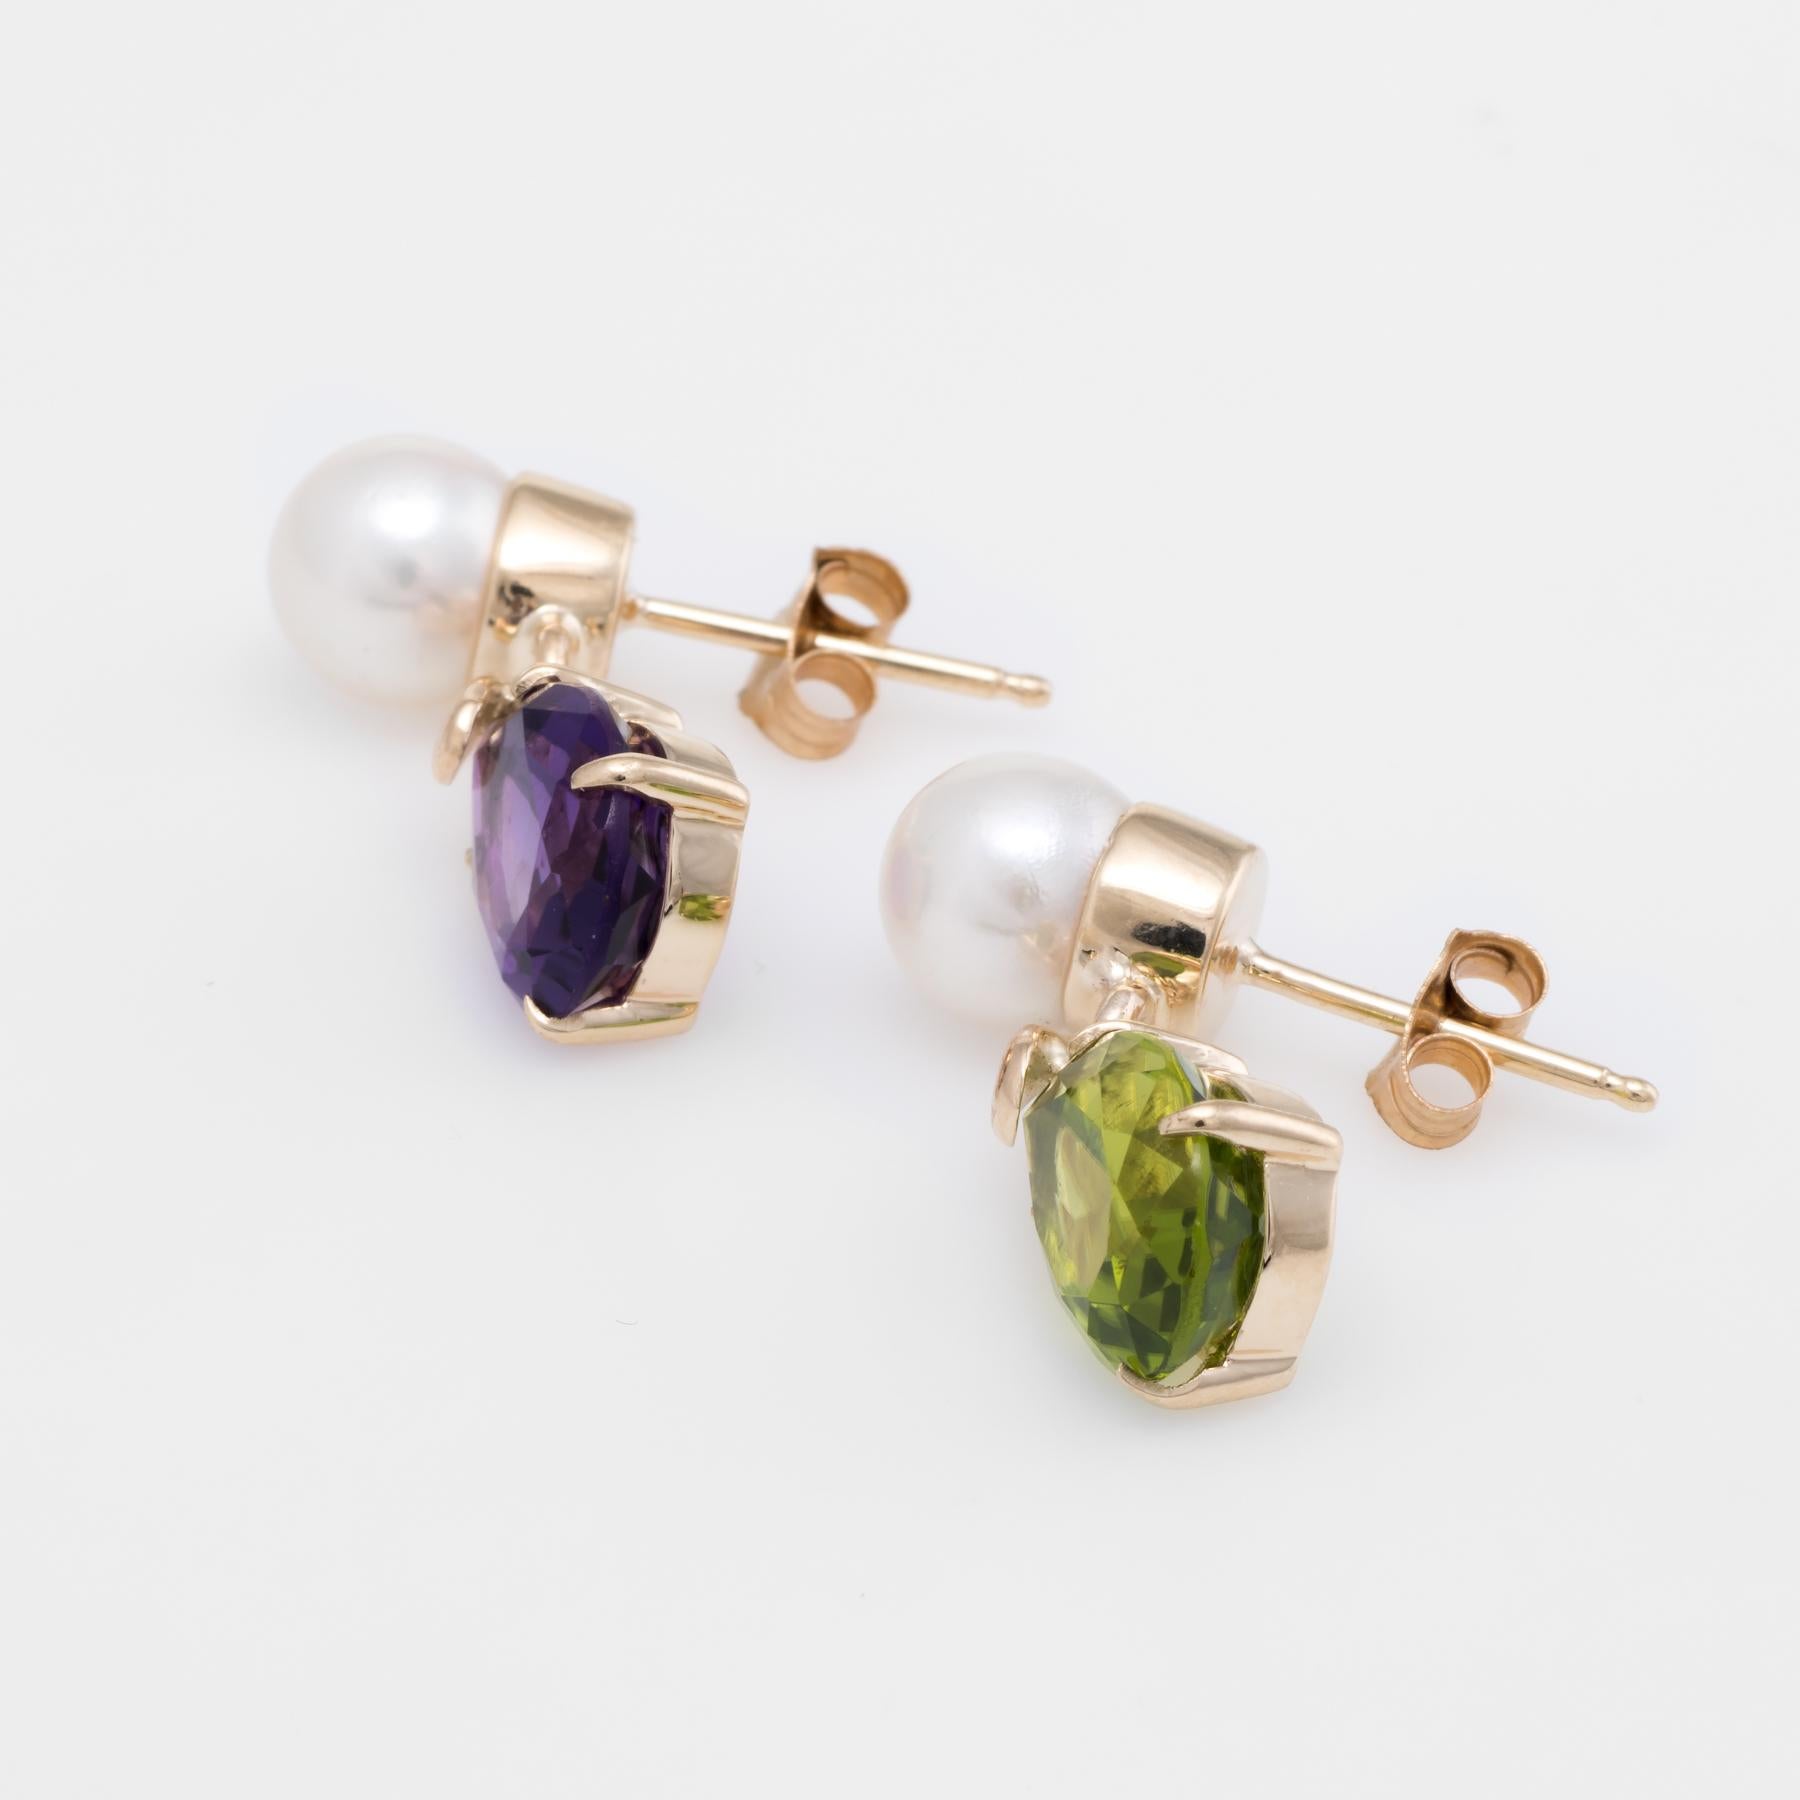 Elegant pair of gemstone drop earrings, crafted in 14k yellow gold. 

Faceted pear cut amethyst and peridot measures 10mm x 8mm (estimated at 2.50 carats each), accented with 2 x 7mm cultured pearls. The gemstones are in excellent condition and free